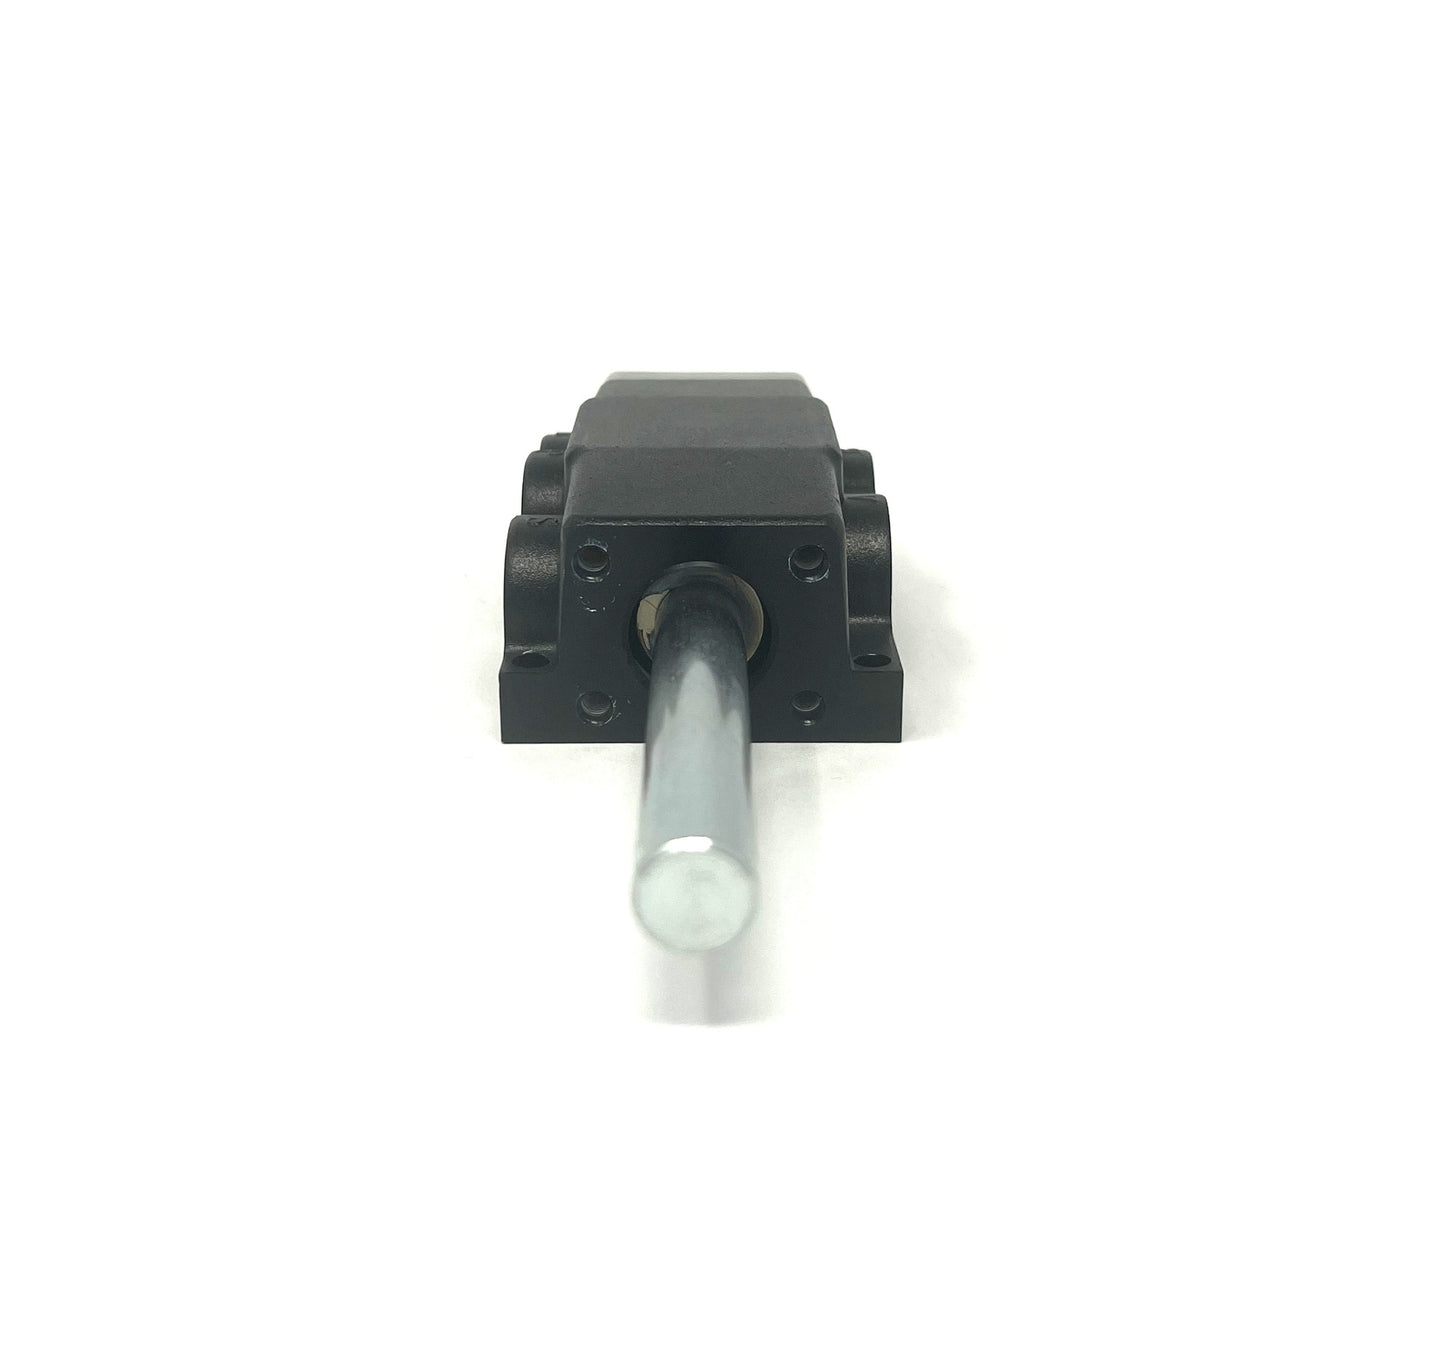 4-Way Internal Spring Air Valve for Coats Tire Changers - OEM Body Style